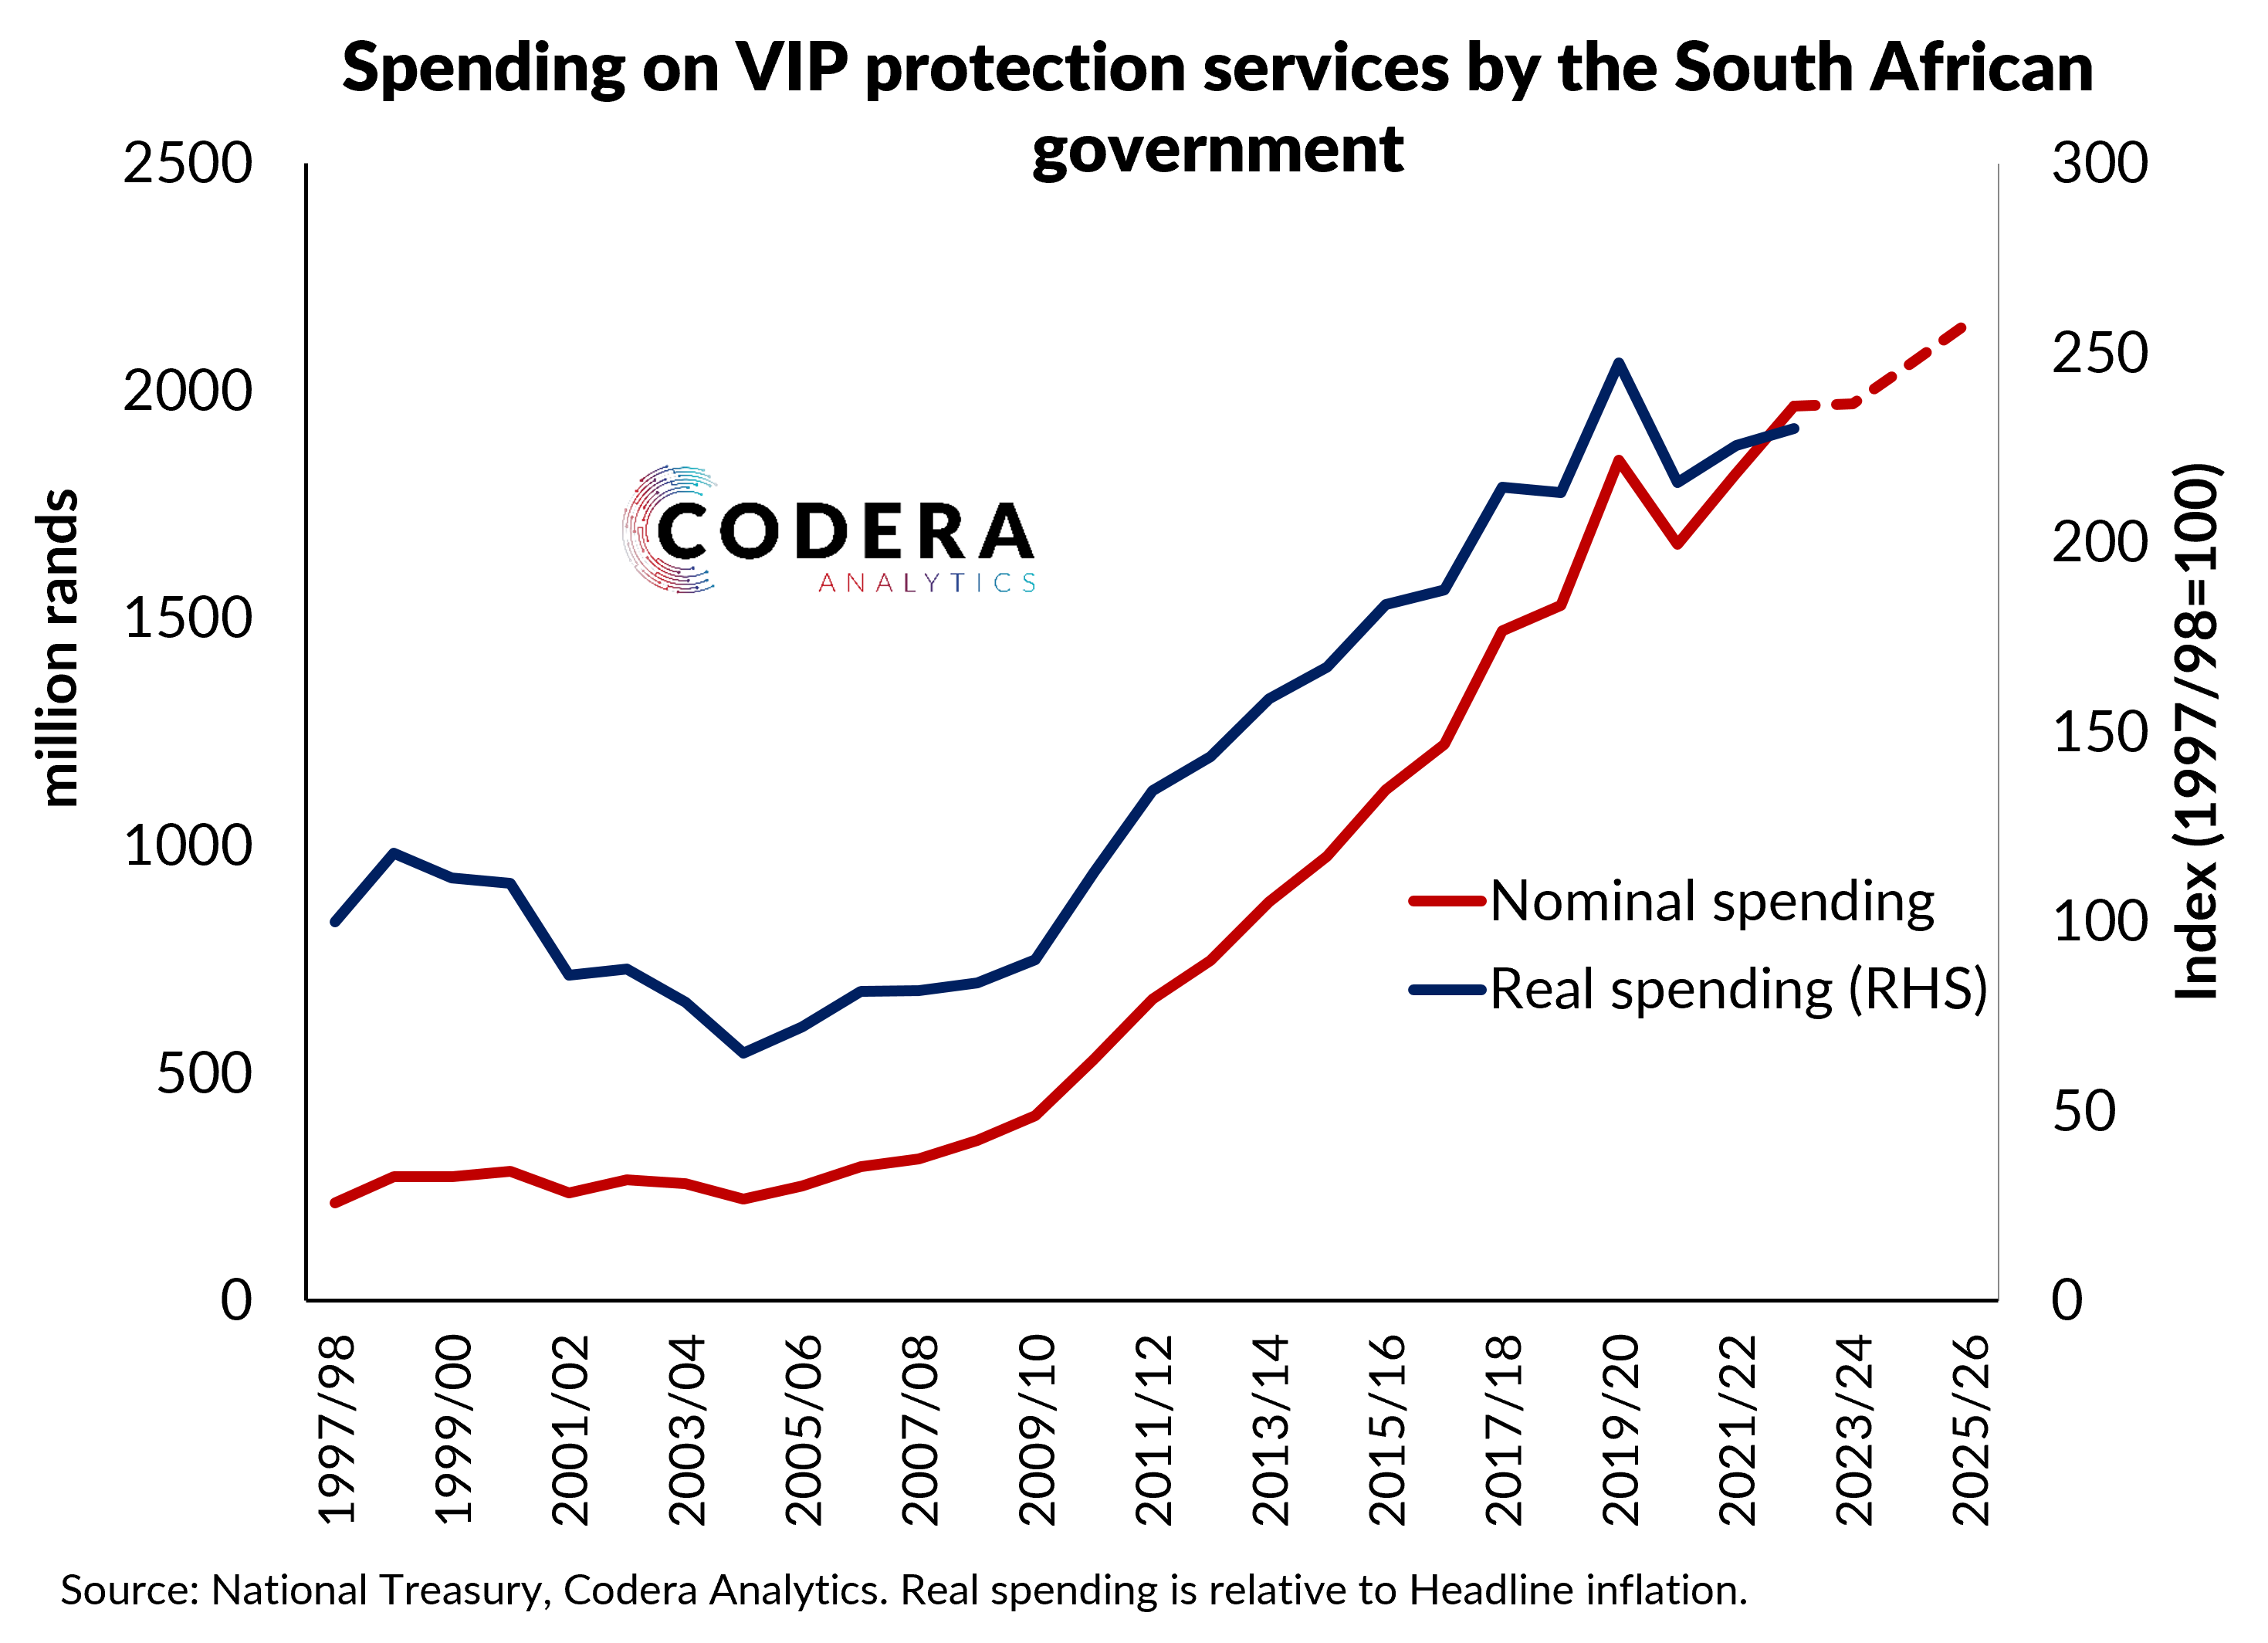 VIP protection services spending by the South African government